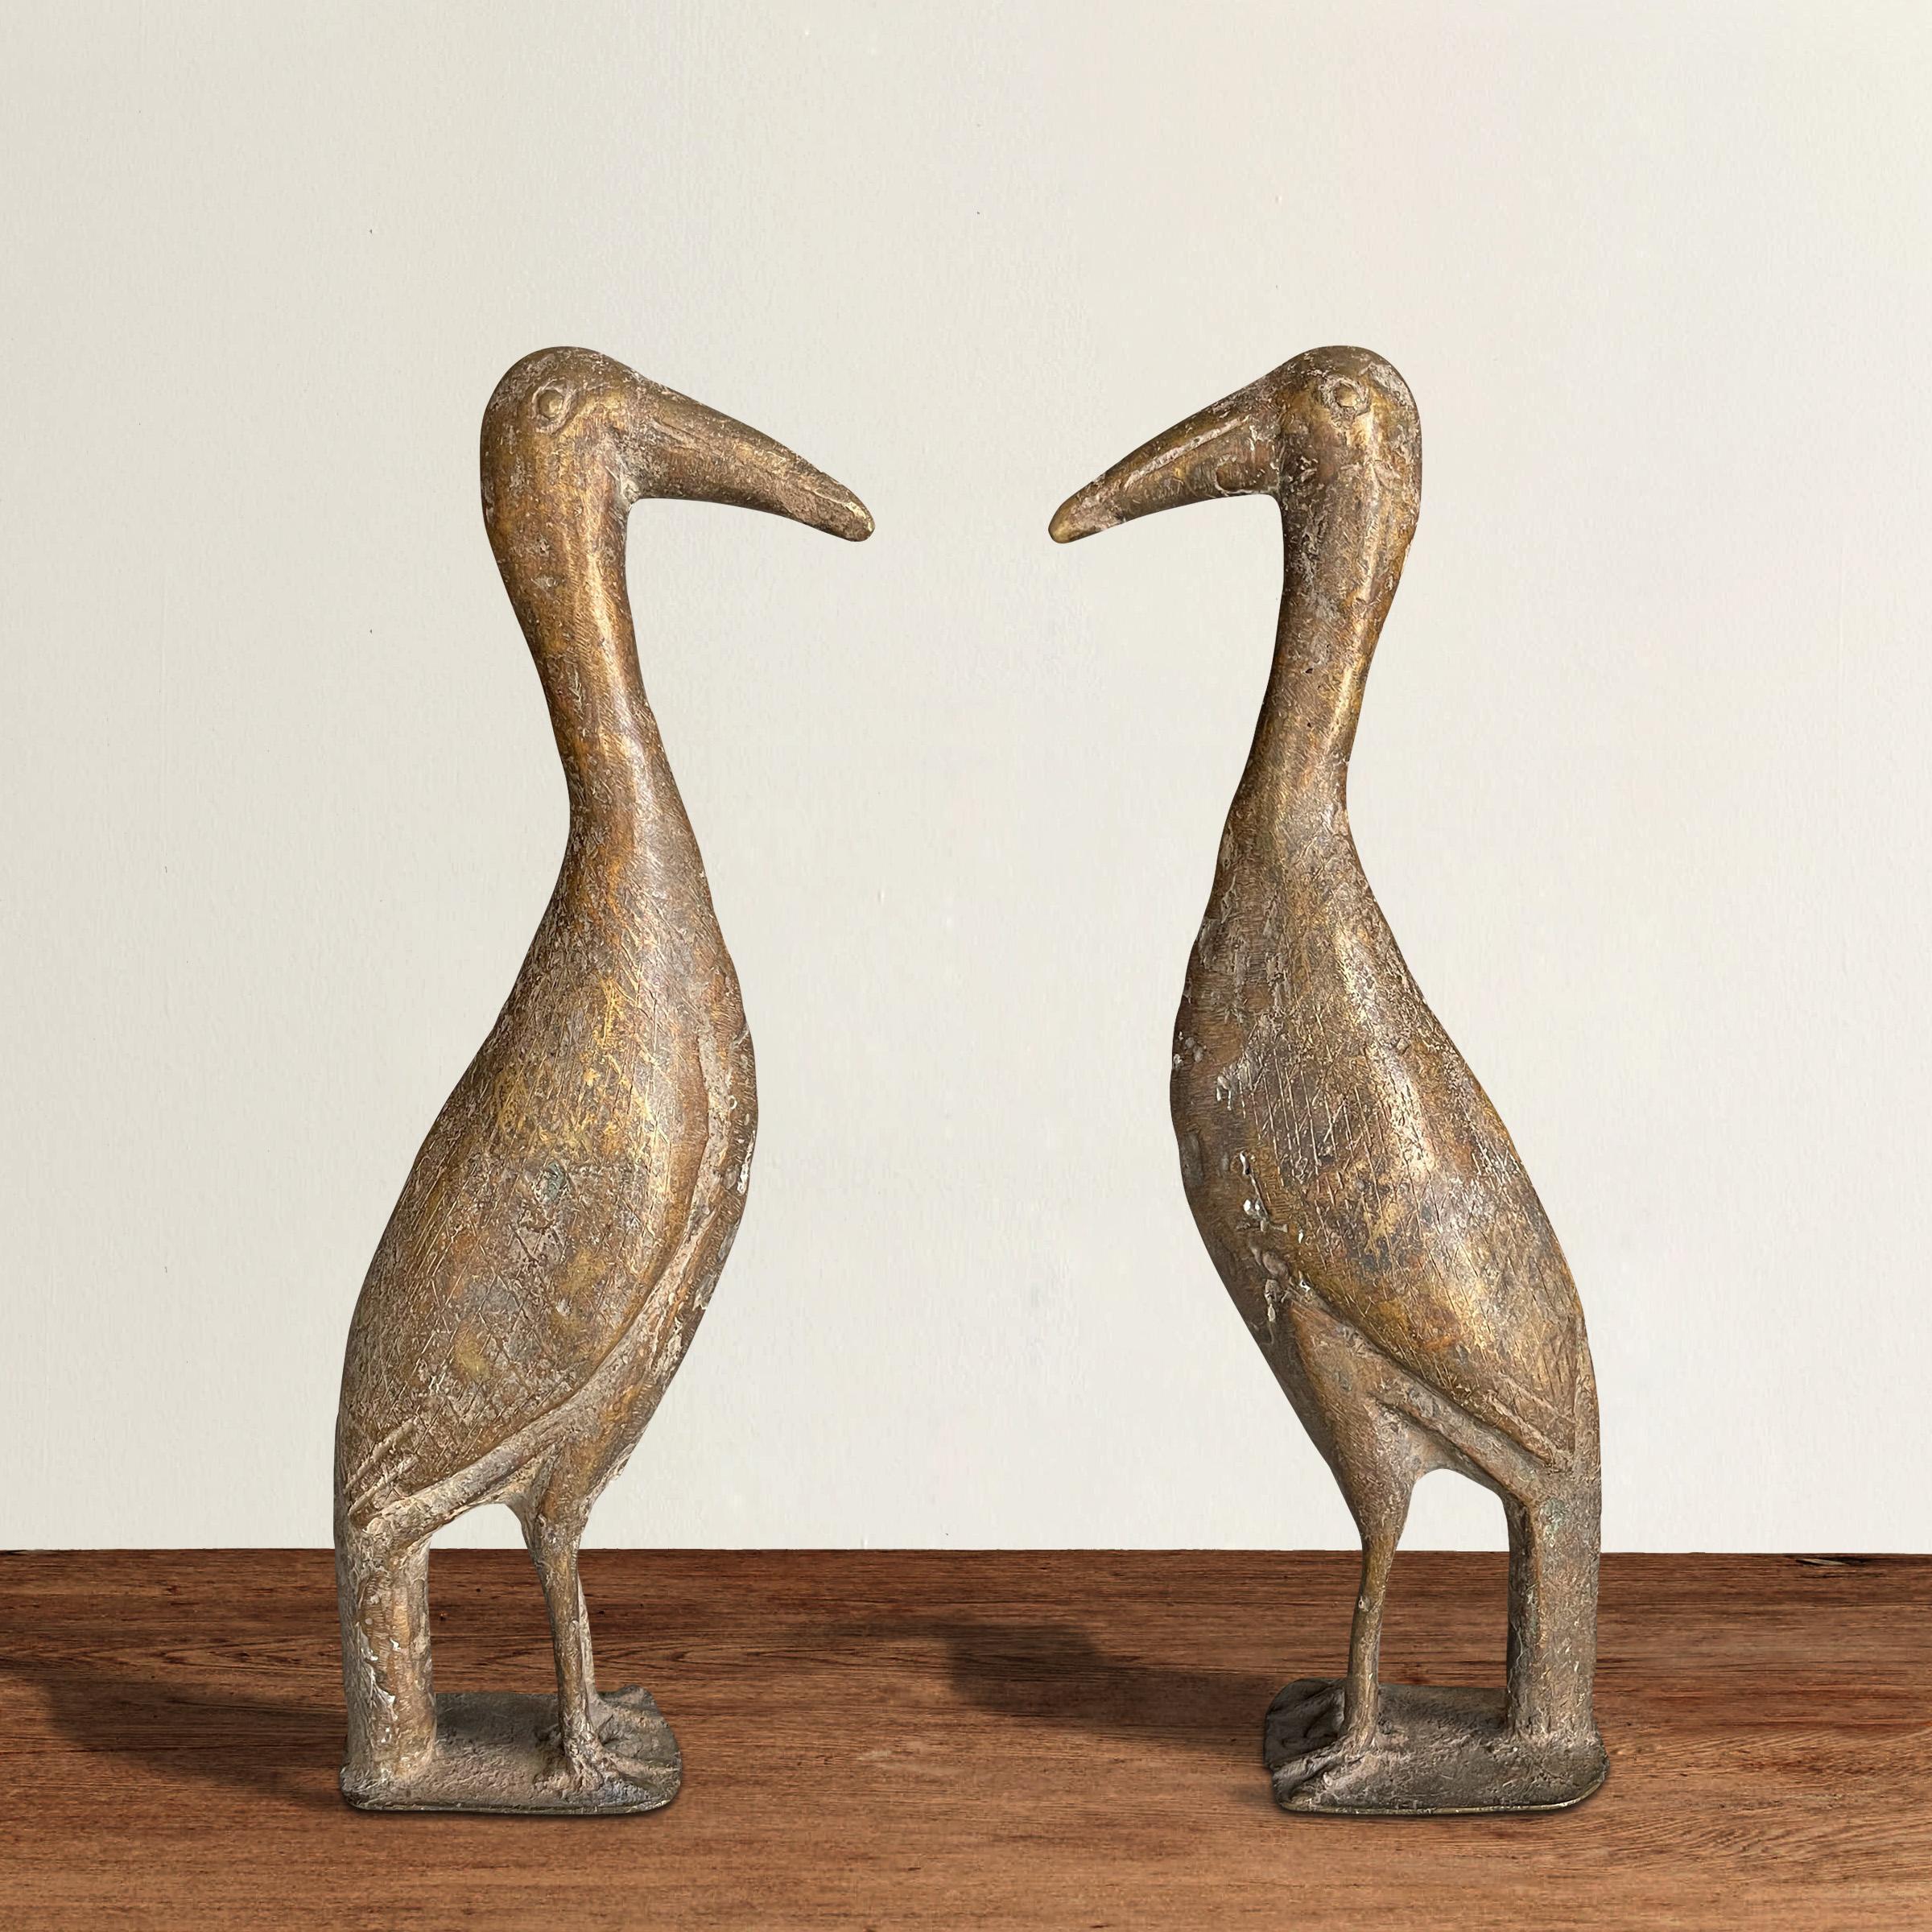 An arresting pair of 20th century West African cast bronze bird sculptures, each with incised feathers, raised eyes, and standing on two legs, resting on flat bases. Perfect for decorating your mantel or bookshelves!